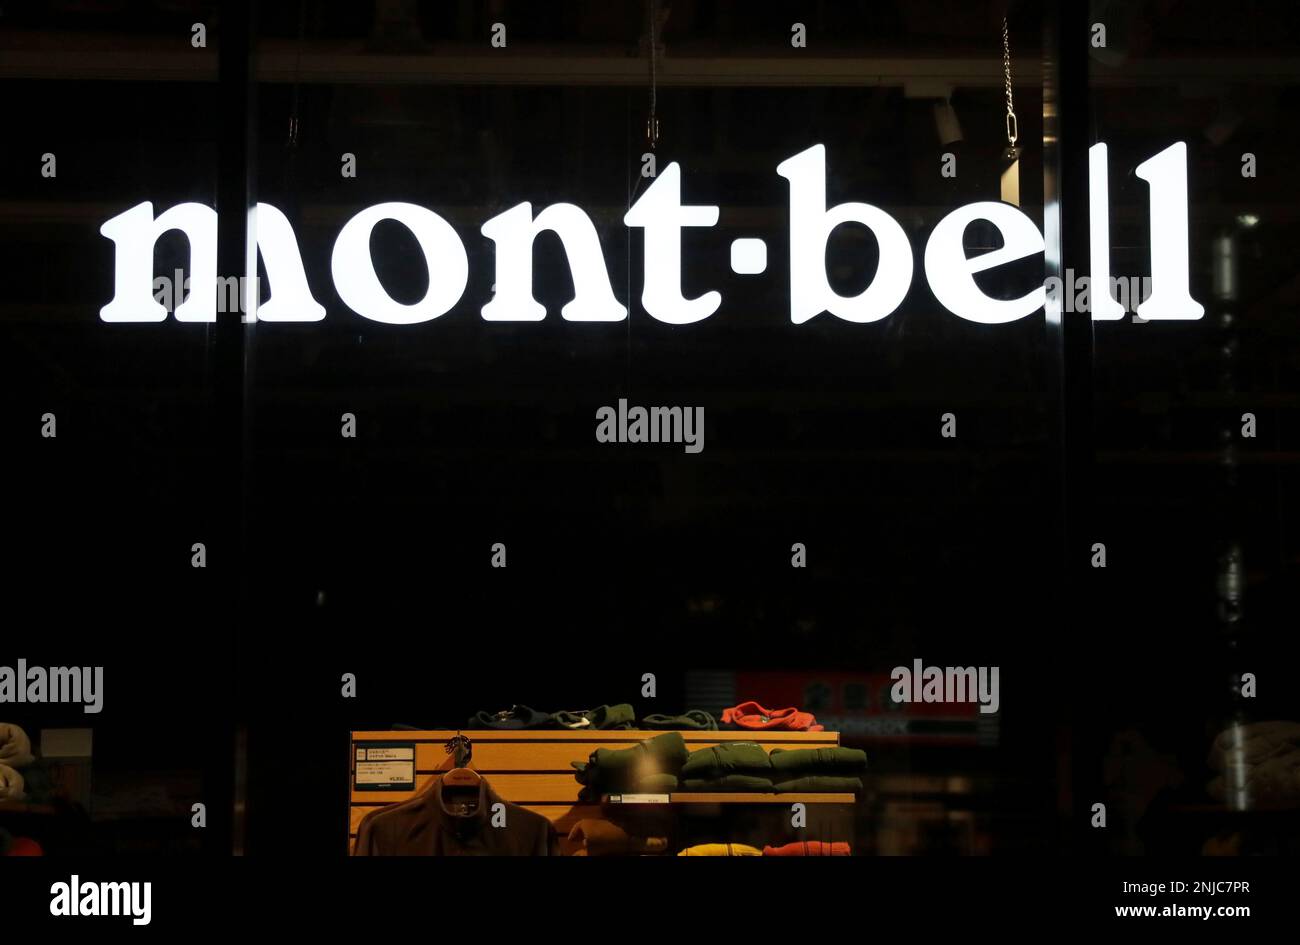 MontBell, Tokyo